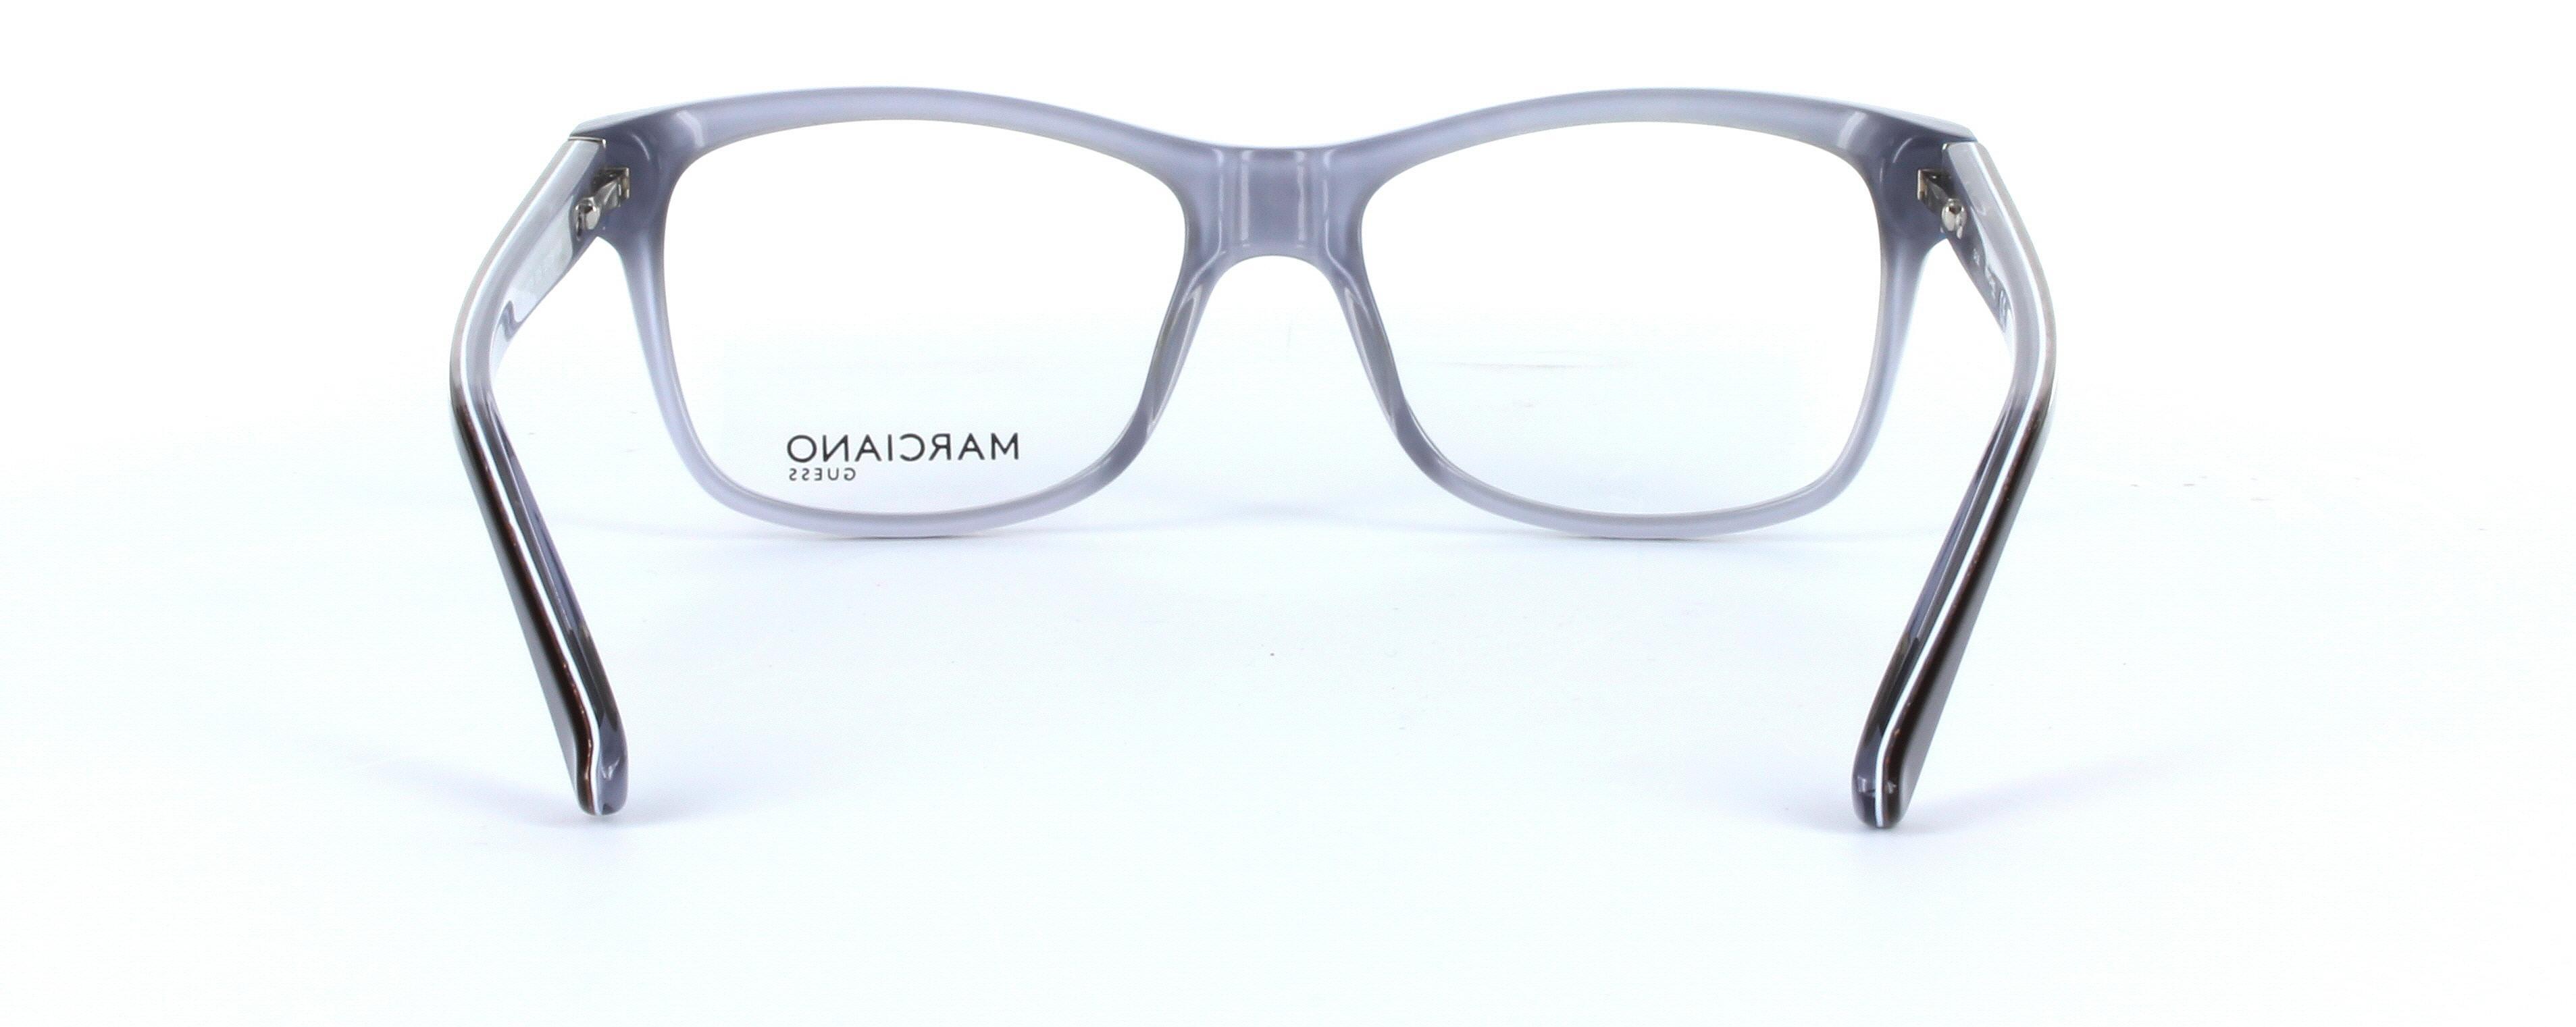 GUESS MARCIANO (GM0279-005) Black Full Rim Oval Rectangular Acetate Glasses - Image View 3